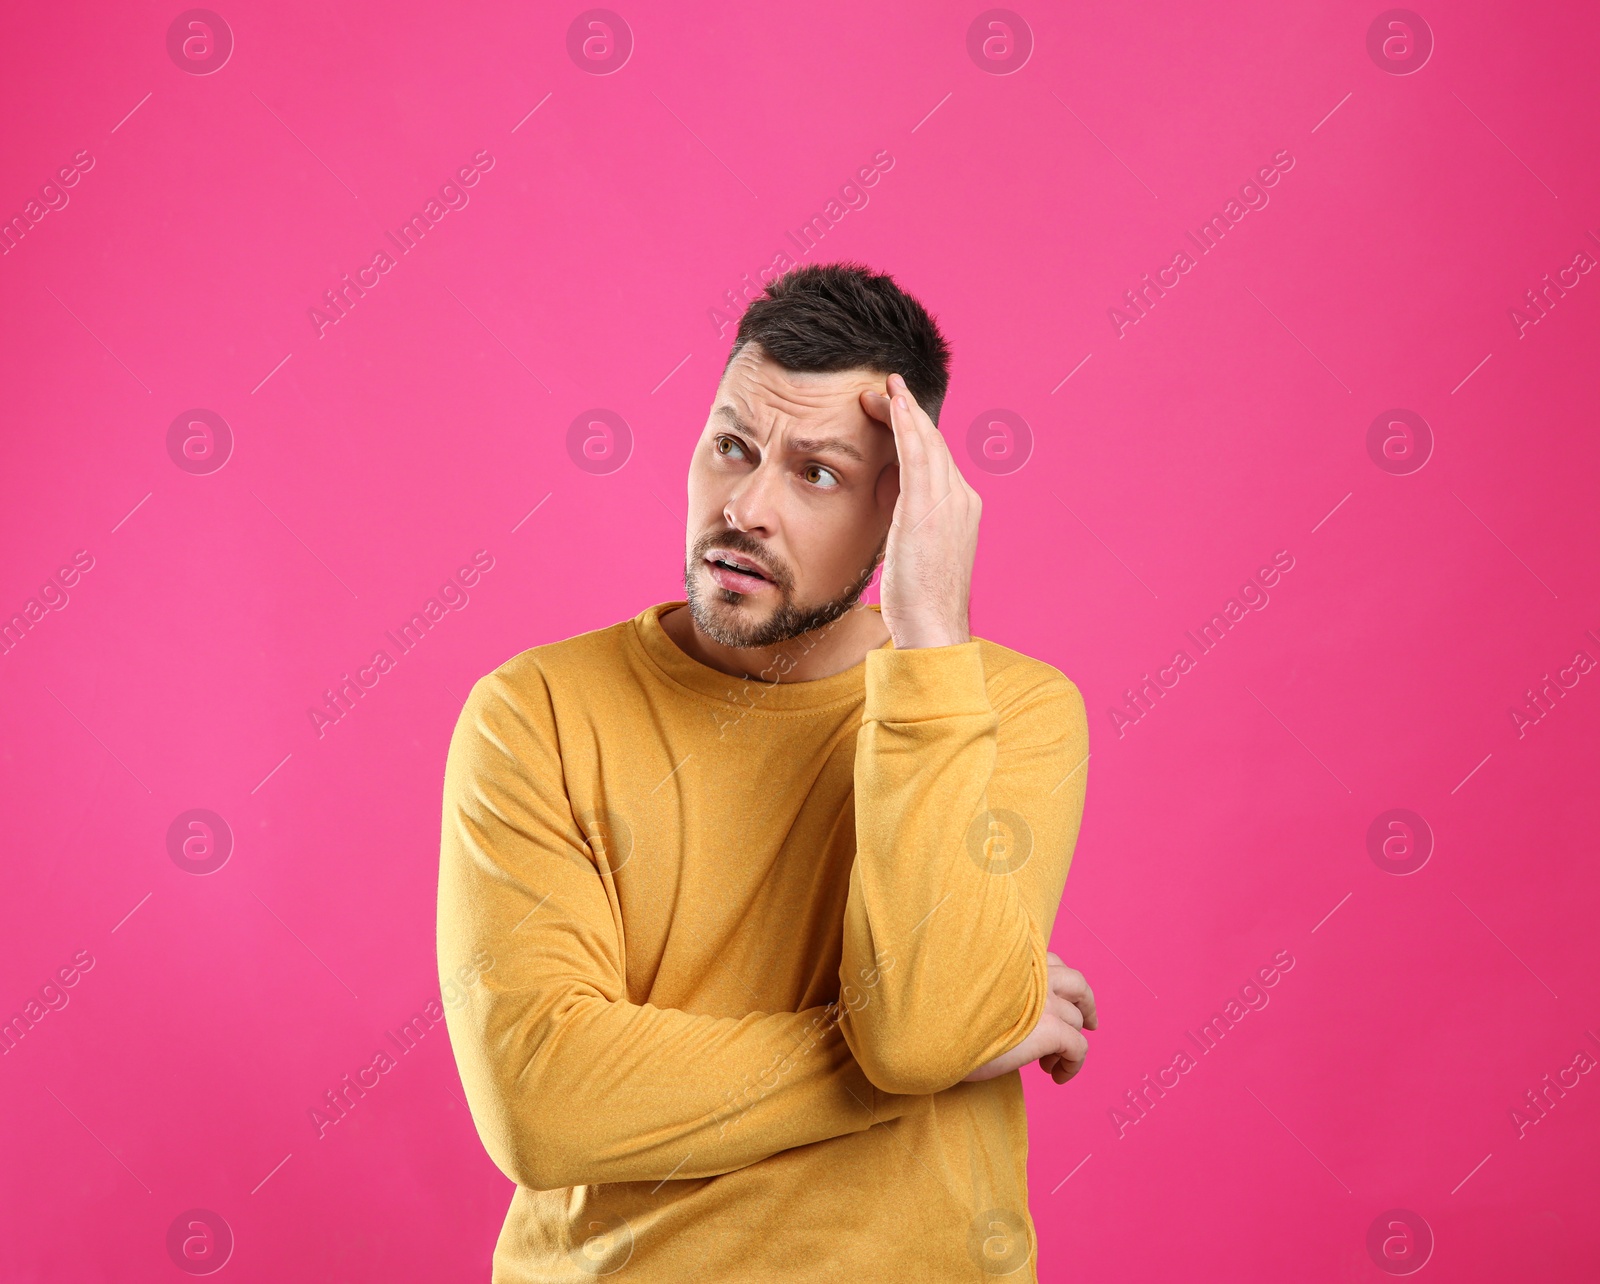 Photo of Emotional man in casual outfit on pink background